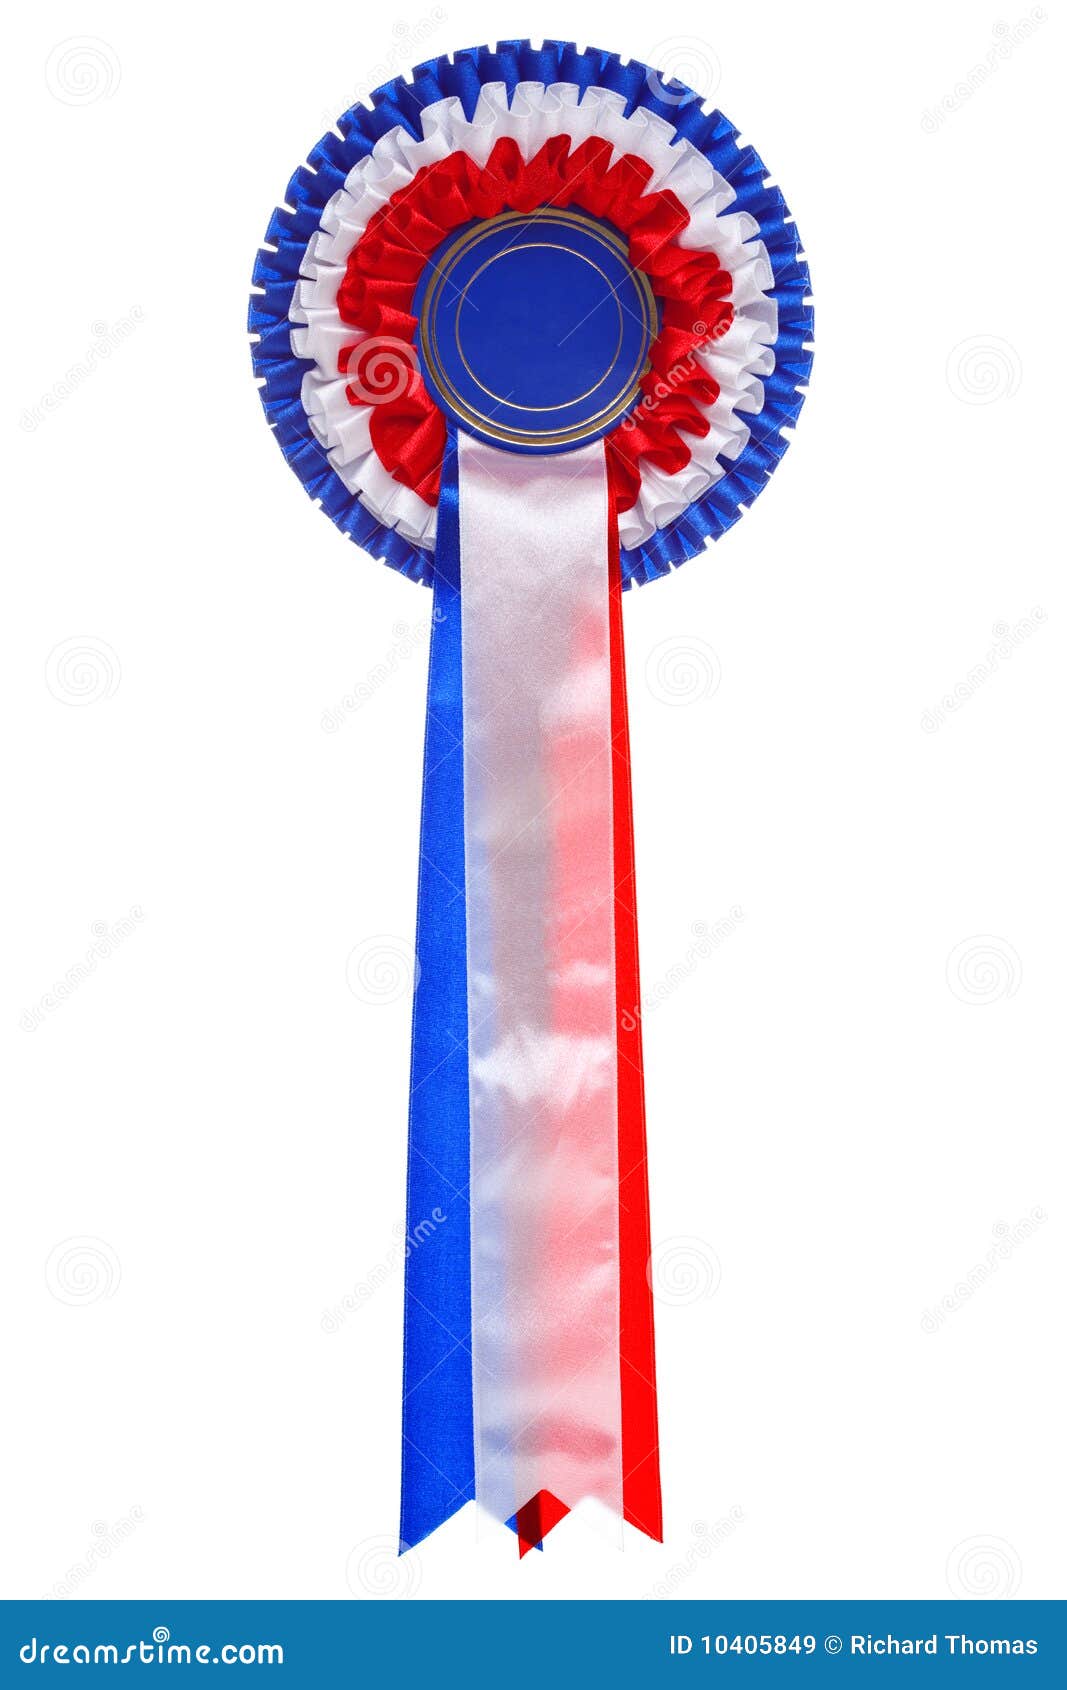 Details about   Winner Or Well Done Rosette 4 Tier Red/White/Blue/Red   *Free Postage* 